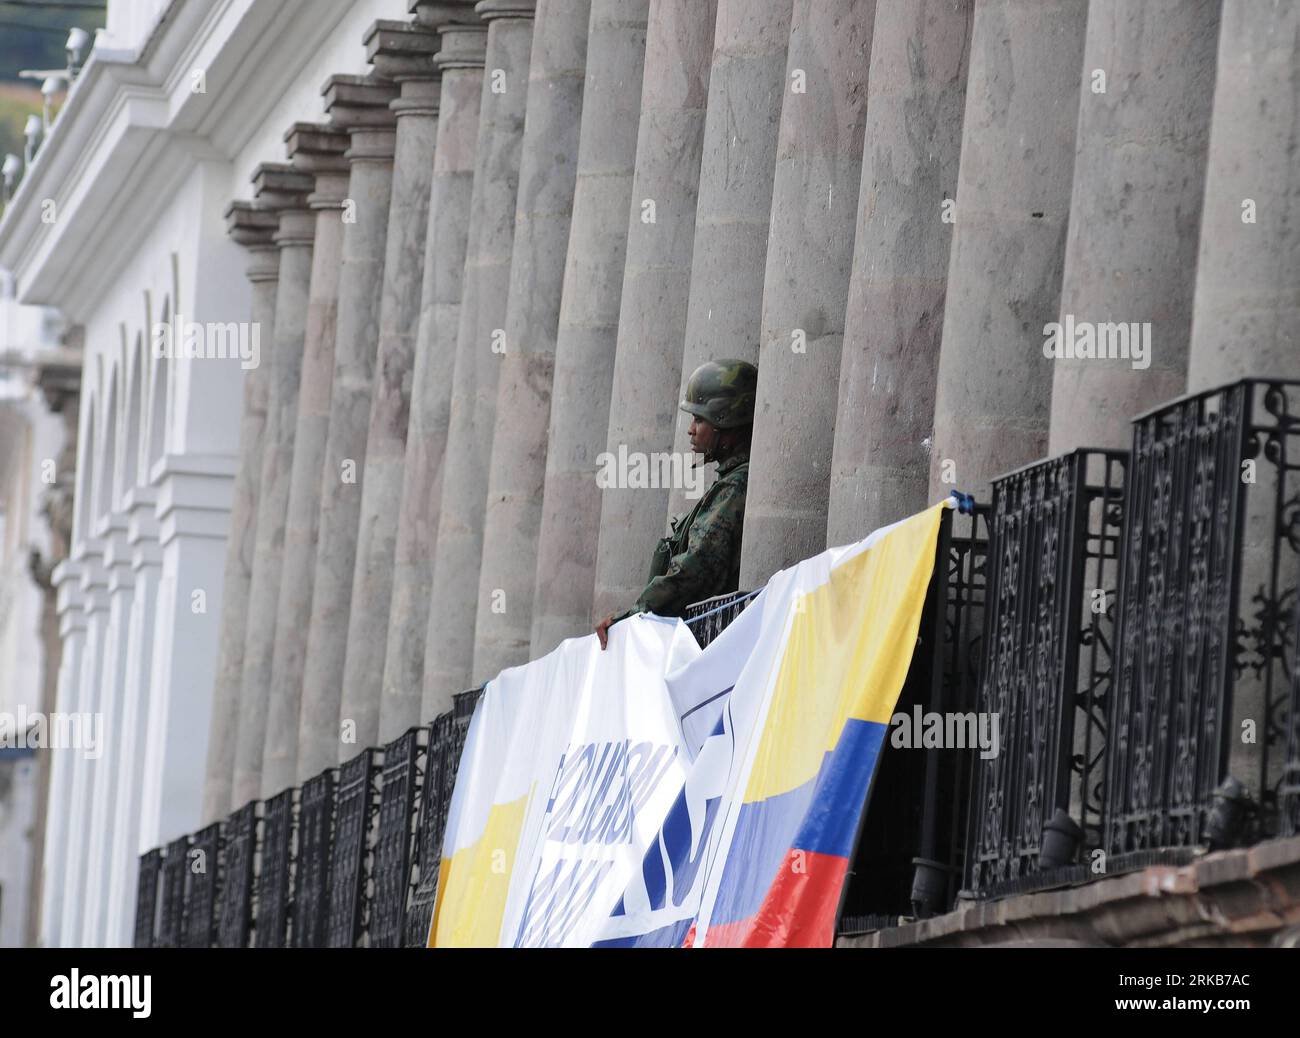 Bildnummer: 54503586  Datum: 01.10.2010  Copyright: imago/Xinhua (101001) -- QUITO, Oct. 1, 2010 (Xinhua) -- An Ecuadorian military soldier stands guard outside the Palacio de Carondelet in Quito, capital of Ecuador, Oct. 1, 2010. Order had apparently returned to Ecuador Friday morning after President Rafael Correa returned safely late Thursday to the presidential palace from a police hospital where he was stranded. Security forces on Thursday staged a protest in Quito against a law passed earlier by the National Assembly that cut benefits for the officers and the unrest quickly spread to some Stock Photo